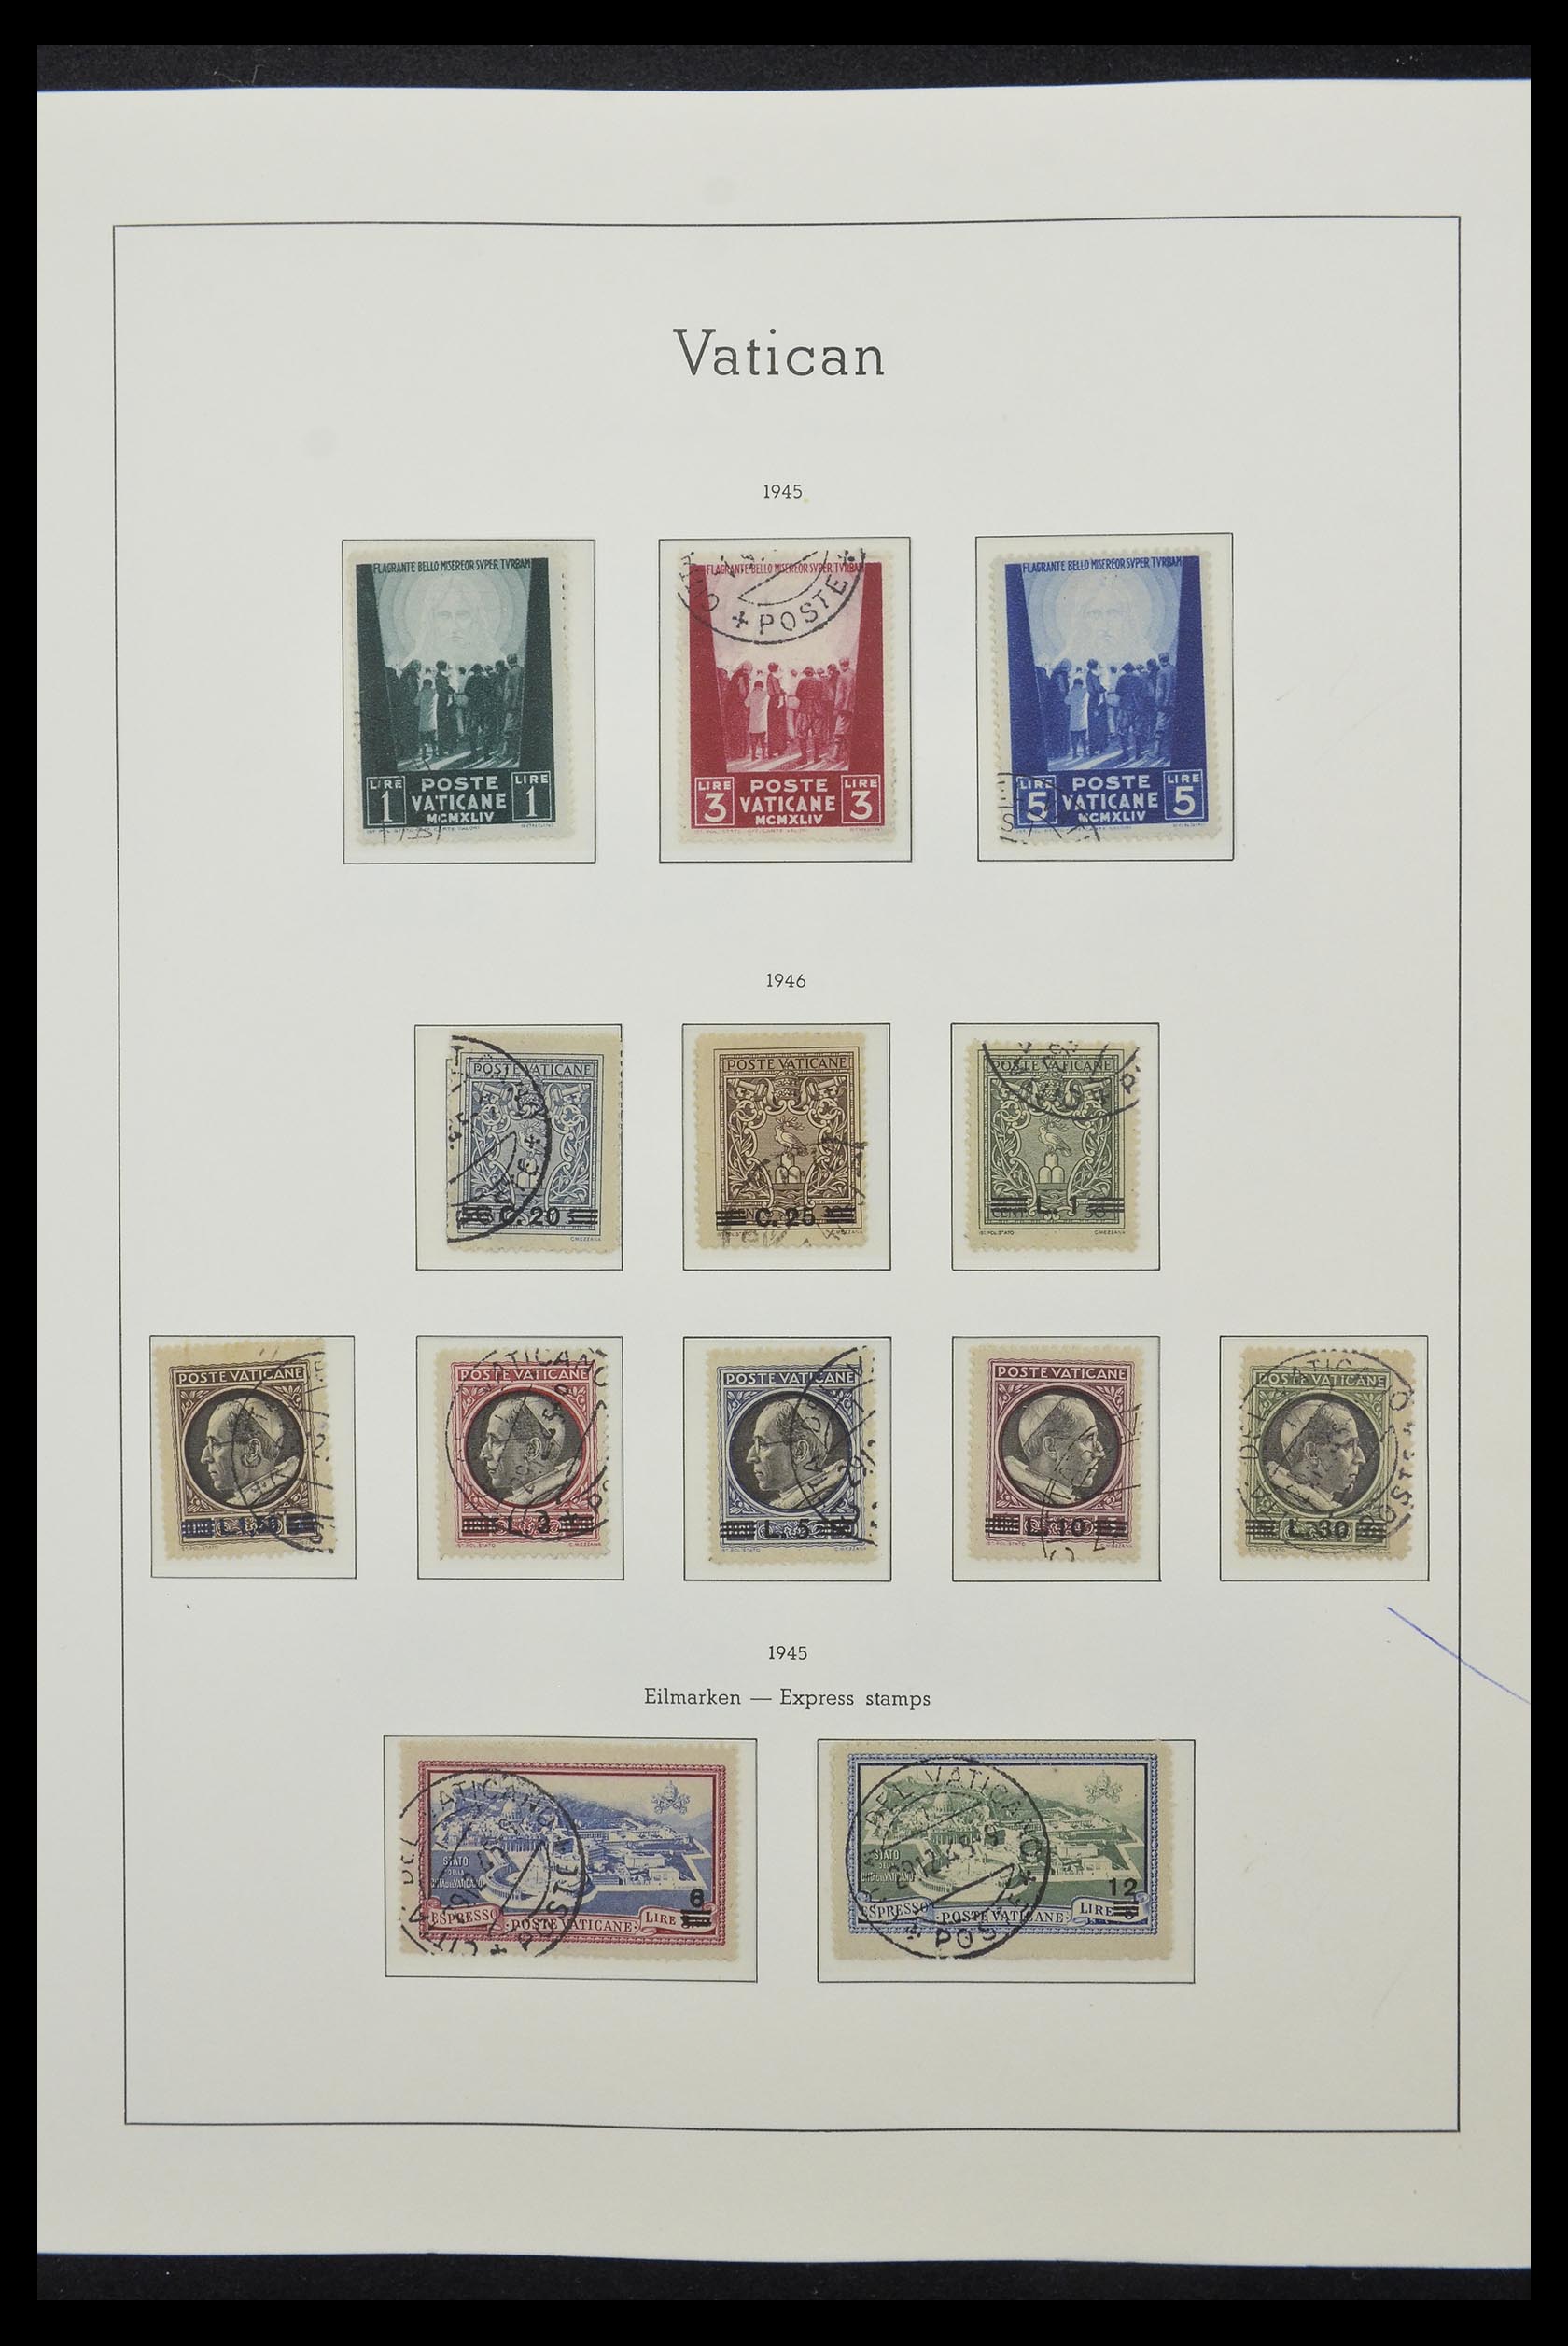 33139 010 - Stamp collection 33139 Vatican 1931-2010.